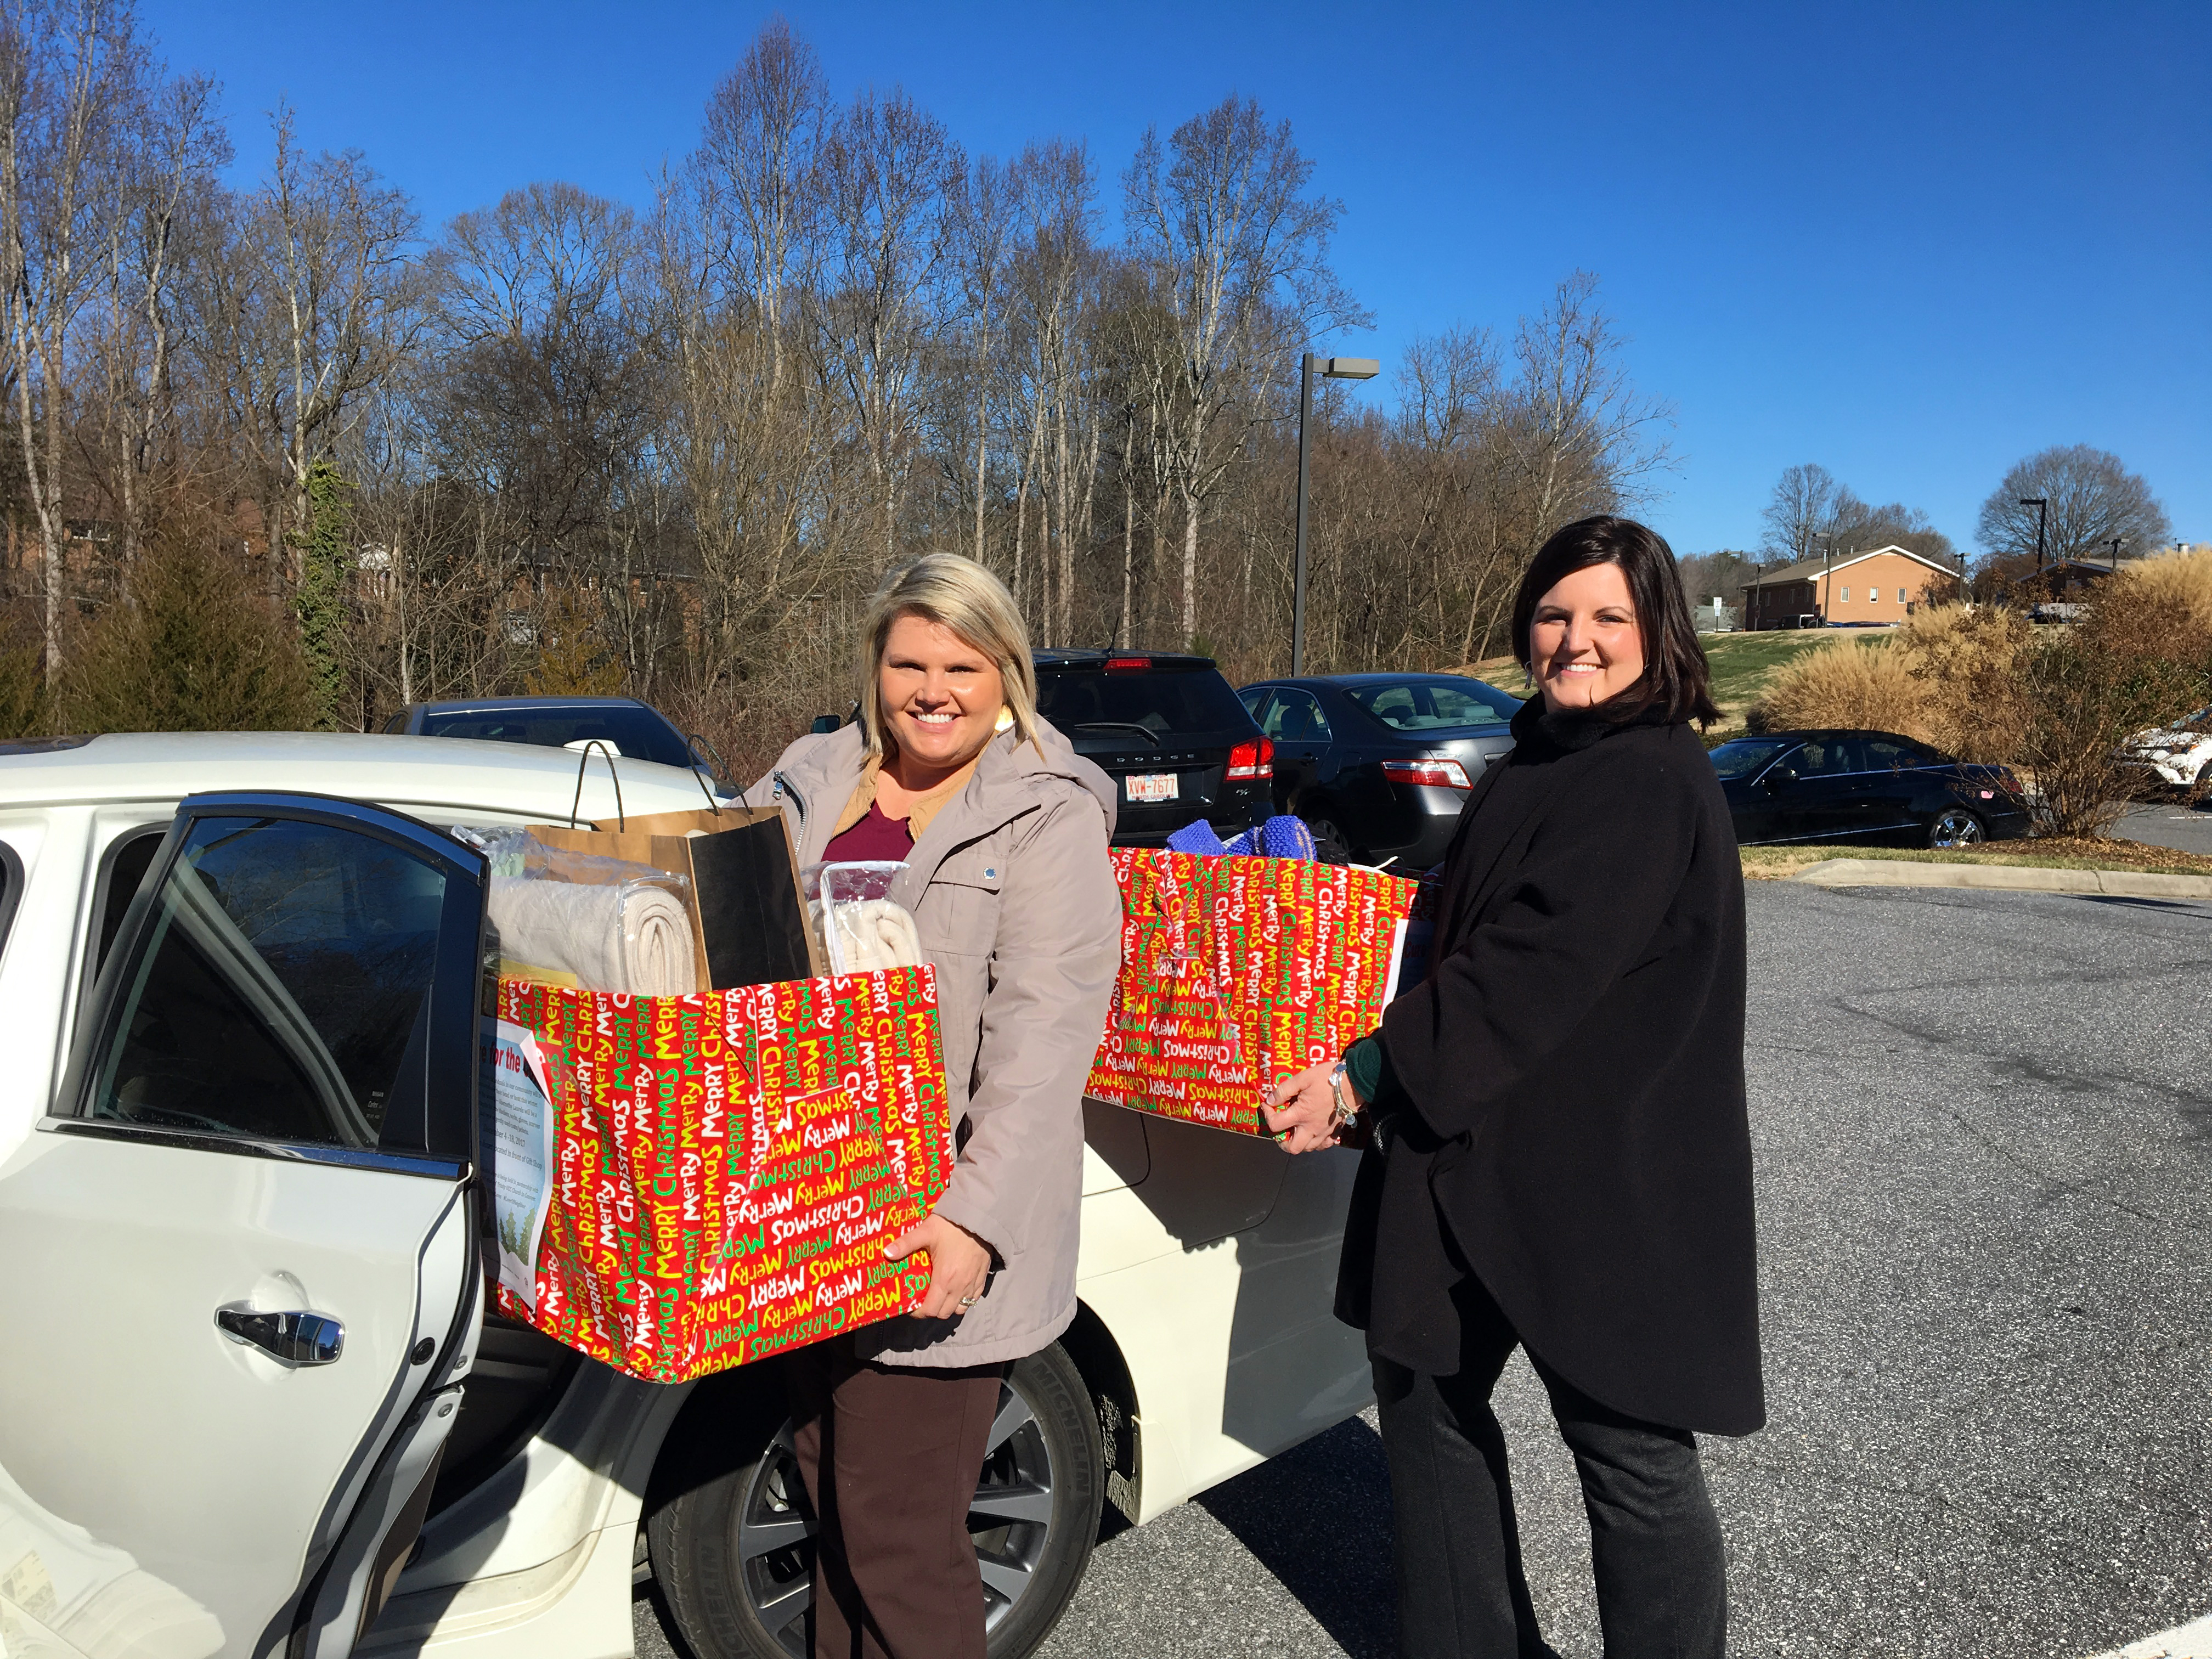 United Church Of Christ S 3 Great Loves Initiative Inspires Two Senior Communities In North Carolina To Reach Out And Read And Share The Warmth Chhsm